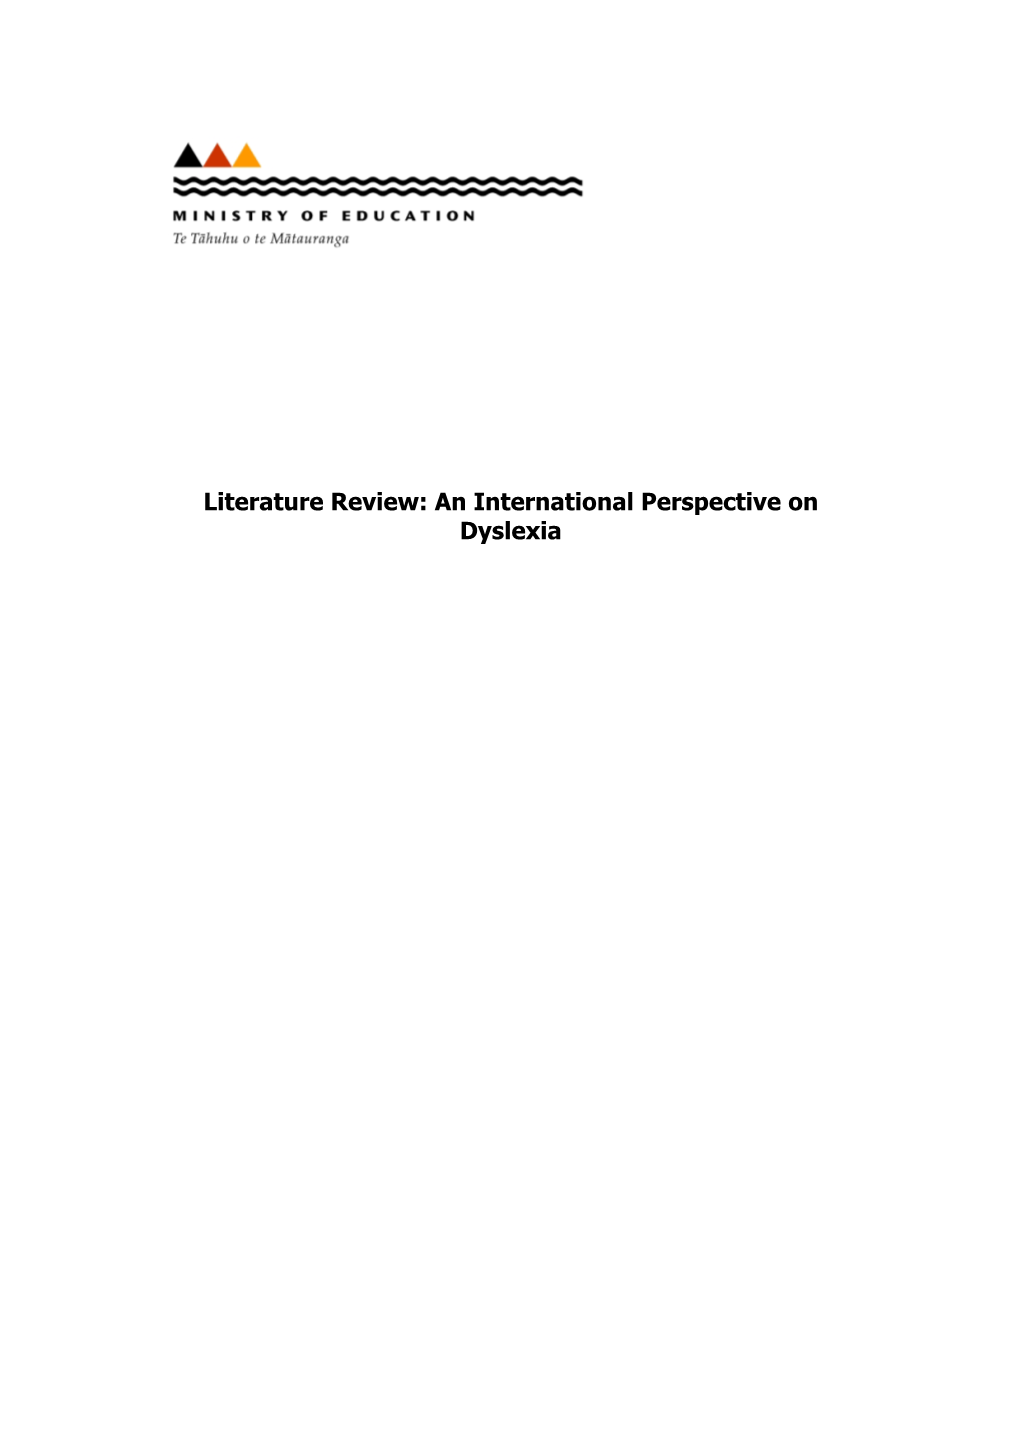 Literature Review: an International Perspective on Dyslexia